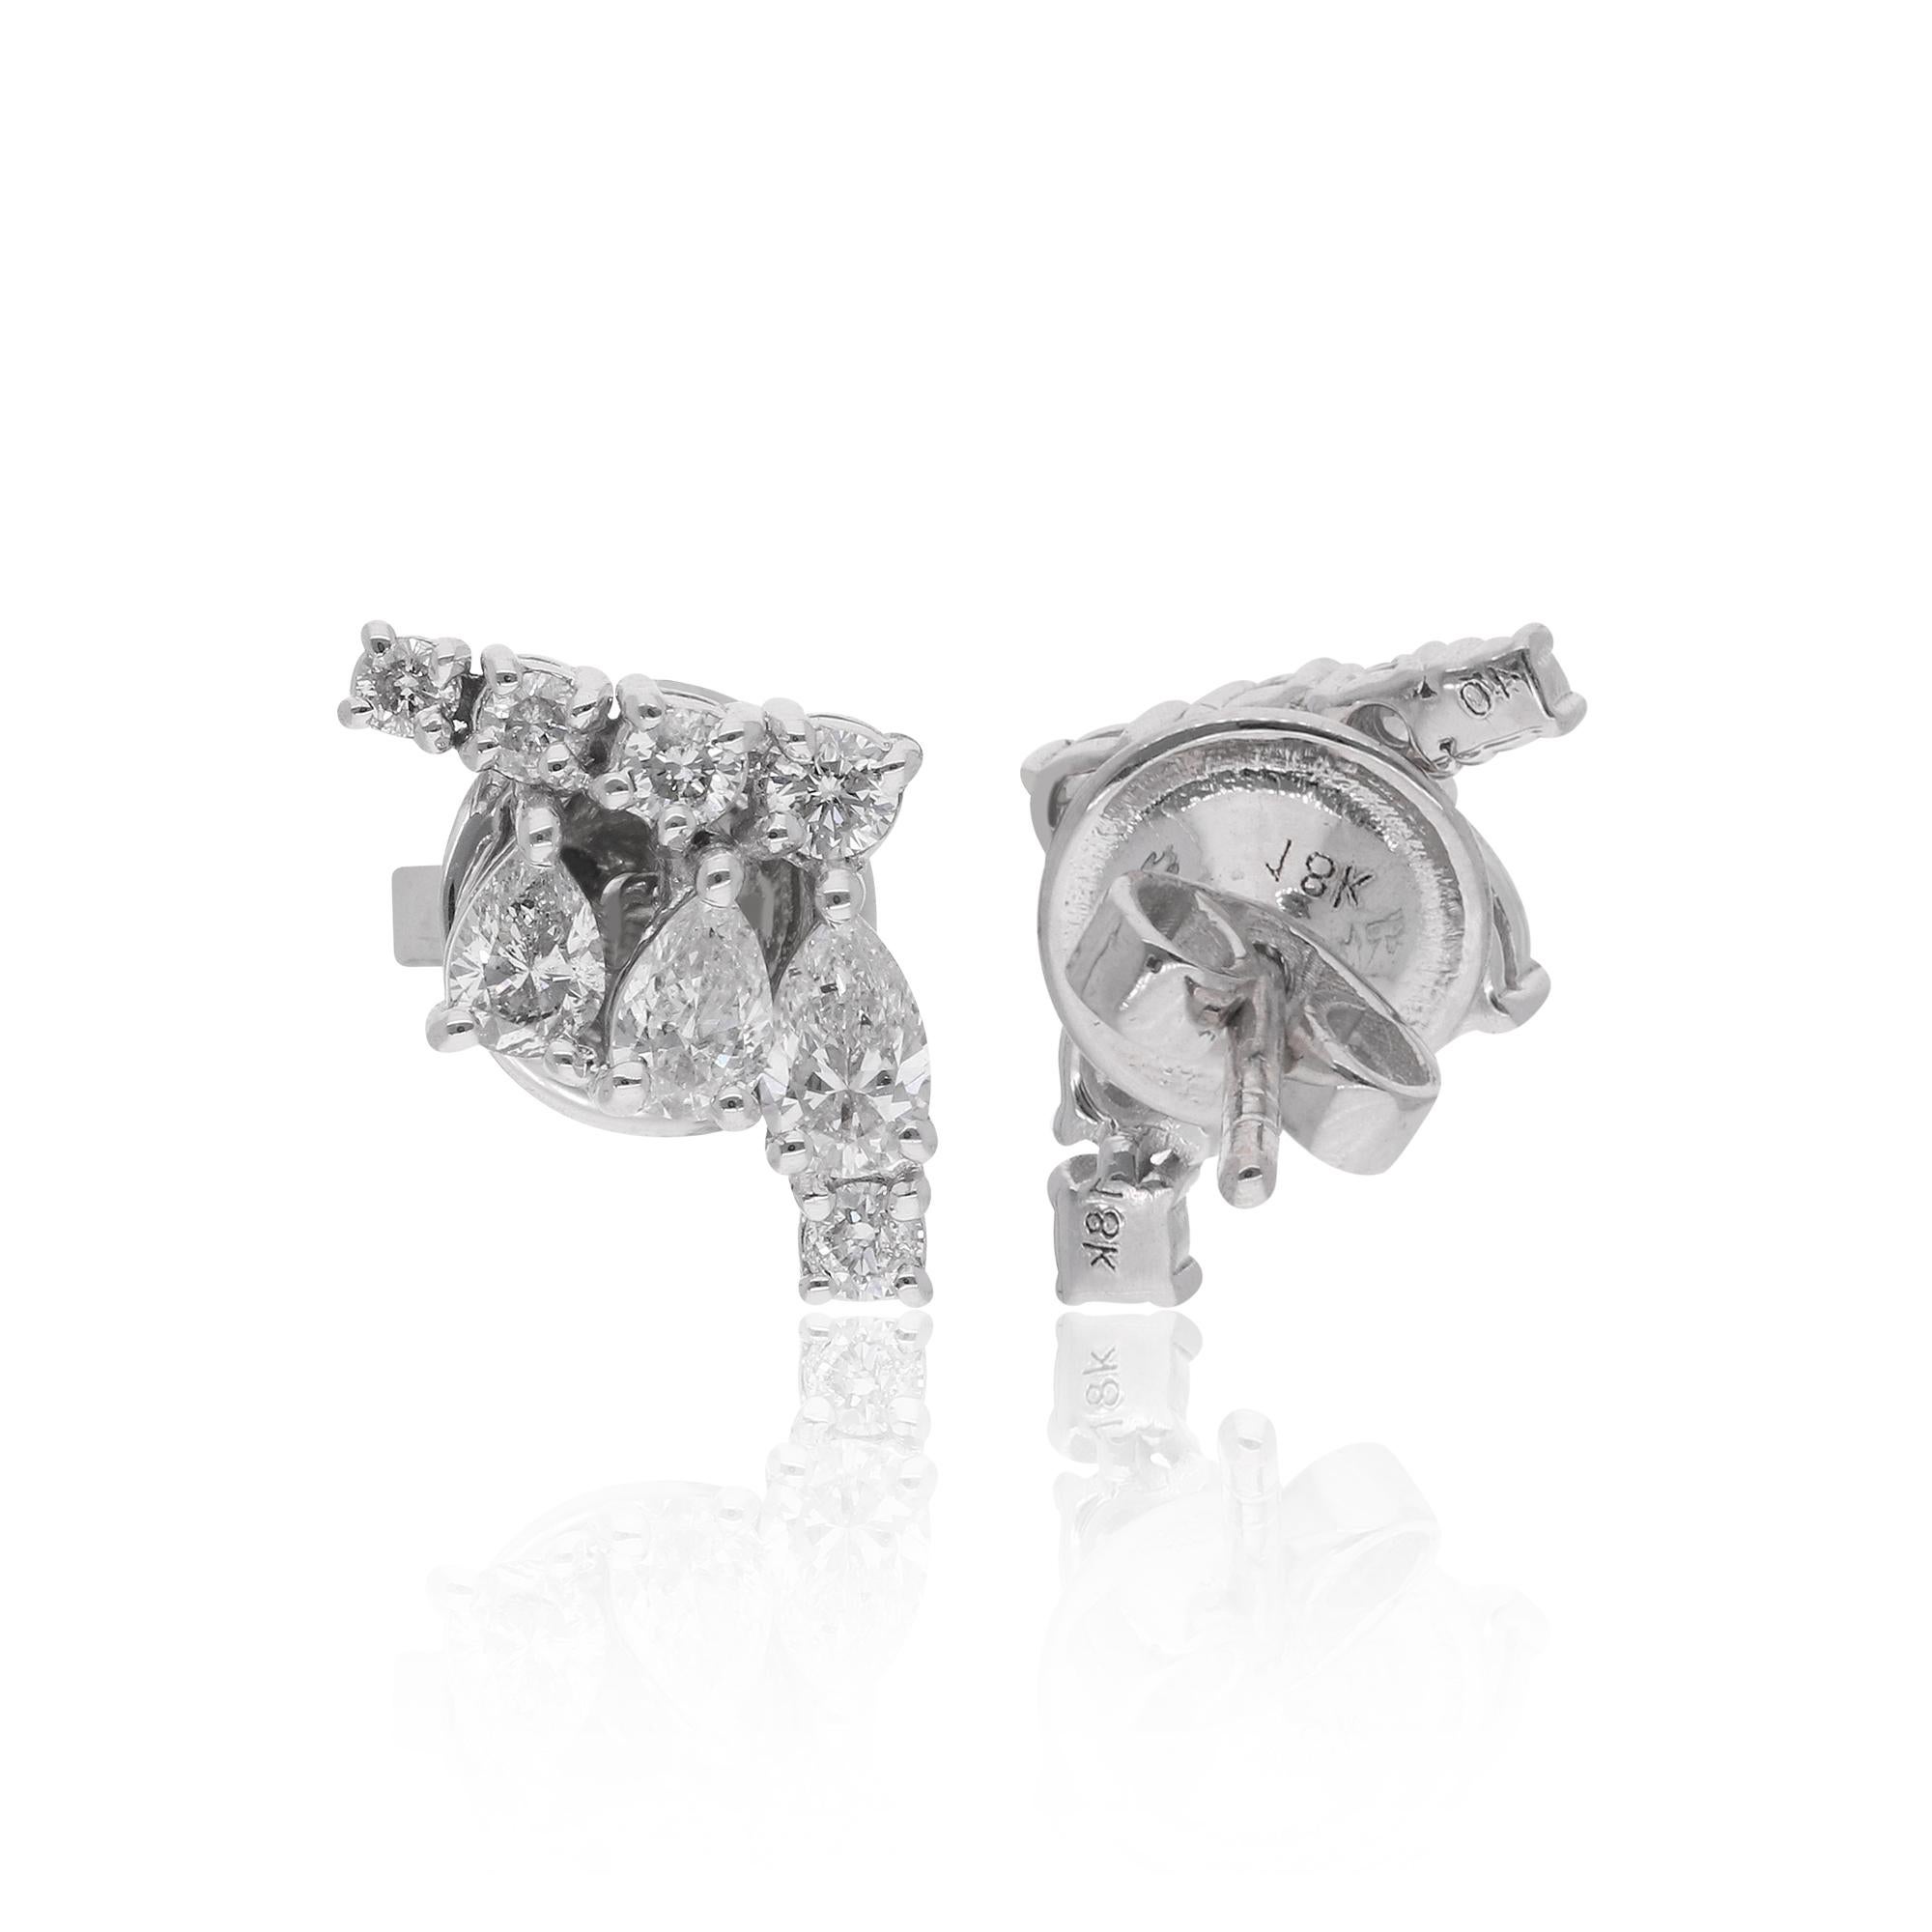 Step into a world of timeless elegance with these stunning round and pear-shaped diamond stud earrings, meticulously crafted in 14 karat white gold. Each earring boasts a mesmerizing combination of round and pear-shaped diamonds totaling 0.84